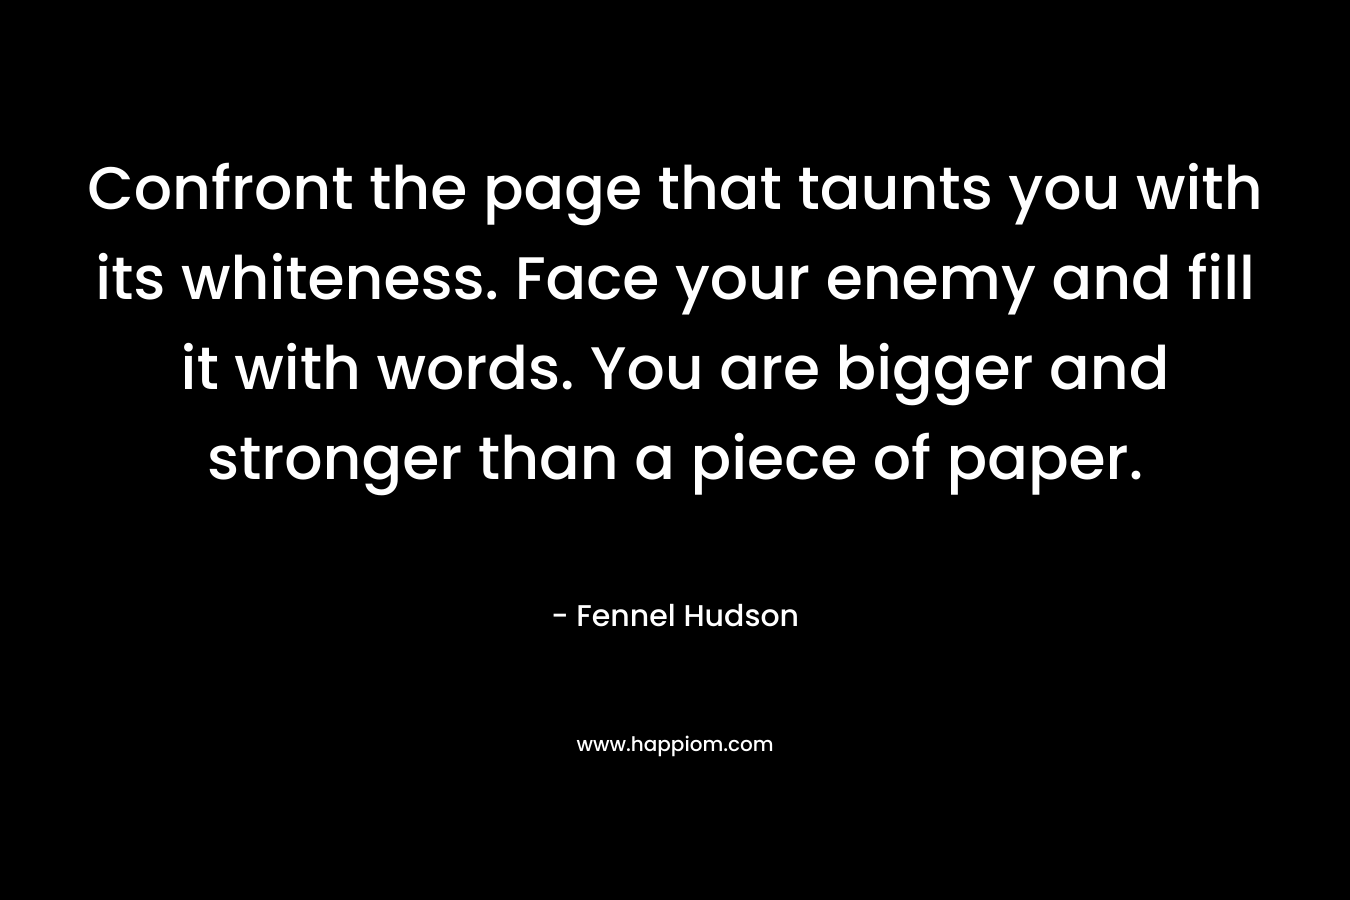 Confront the page that taunts you with its whiteness. Face your enemy and fill it with words. You are bigger and stronger than a piece of paper. – Fennel Hudson